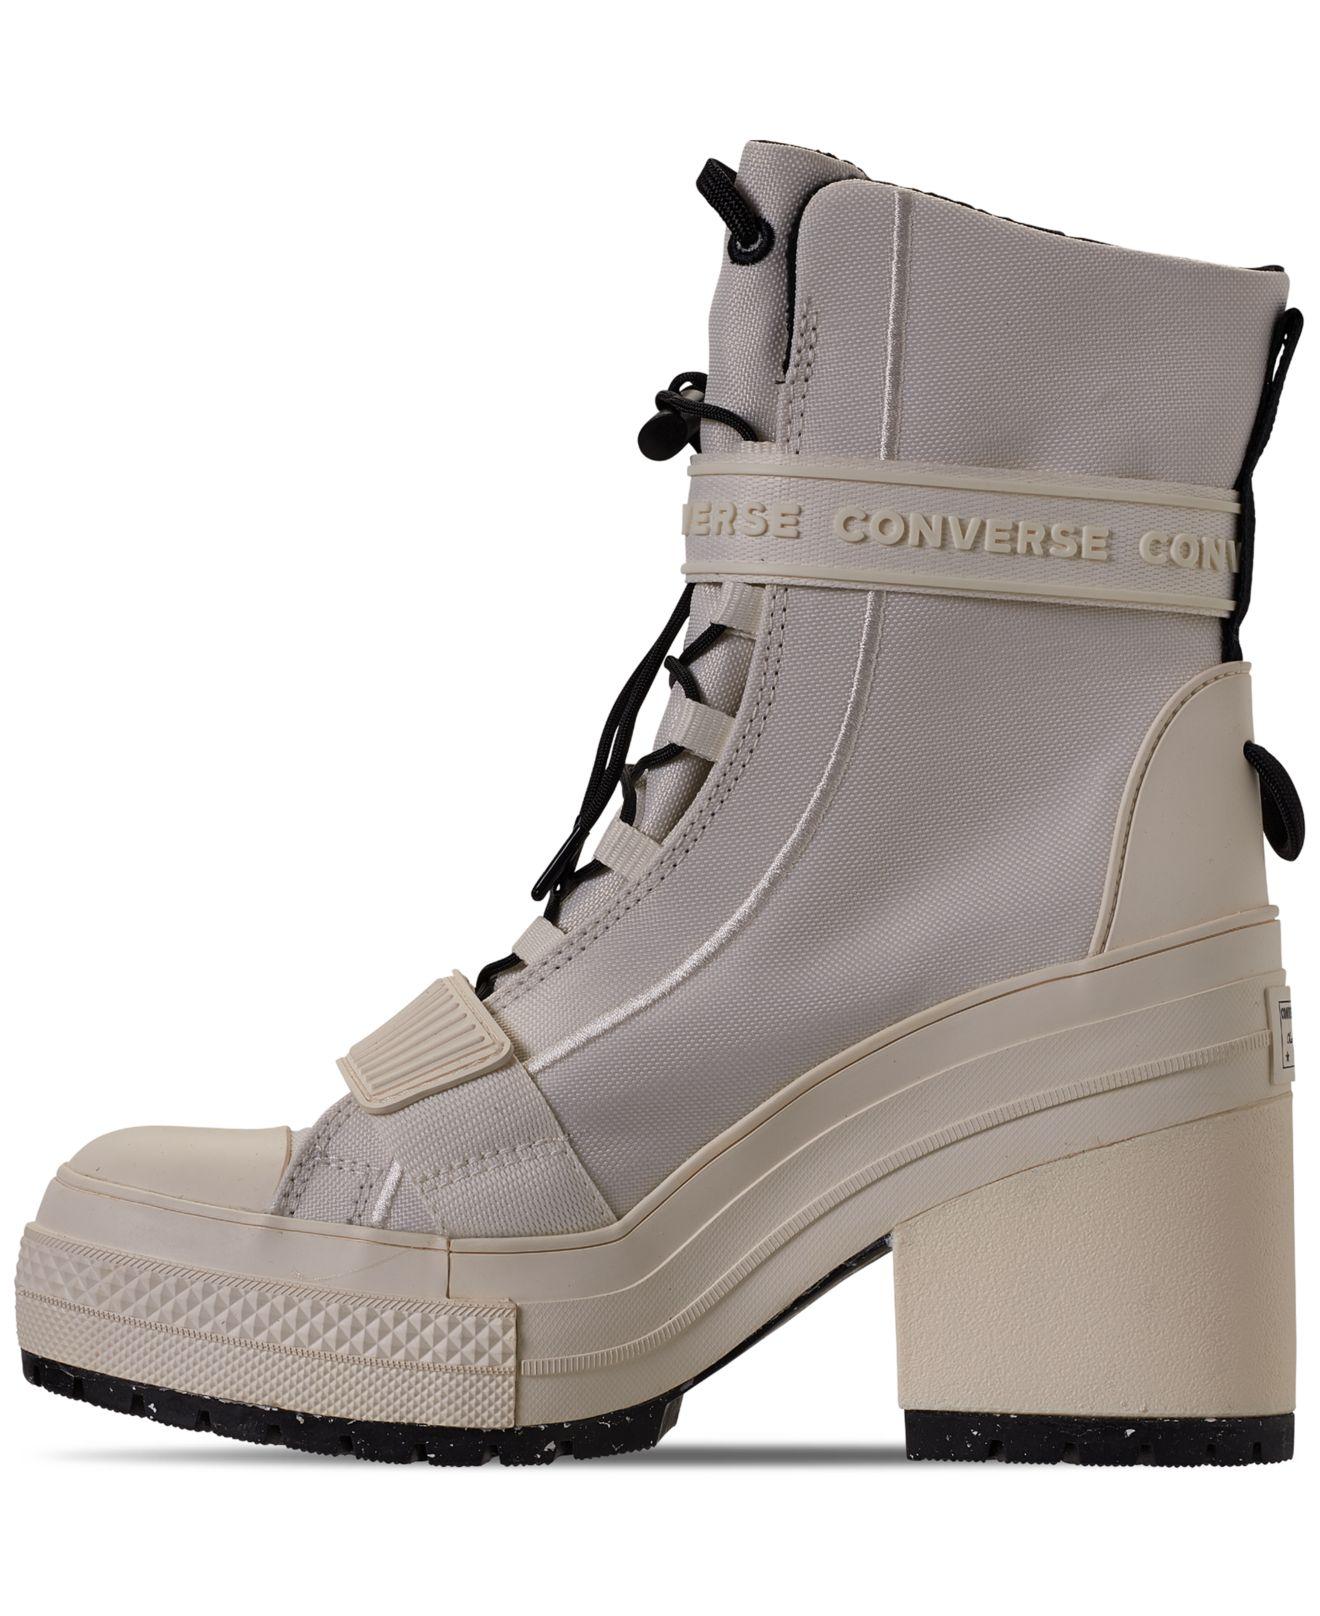 Converse Gr-82 Chuck Taylor All Star Boots From Finish Line in White | Lyst